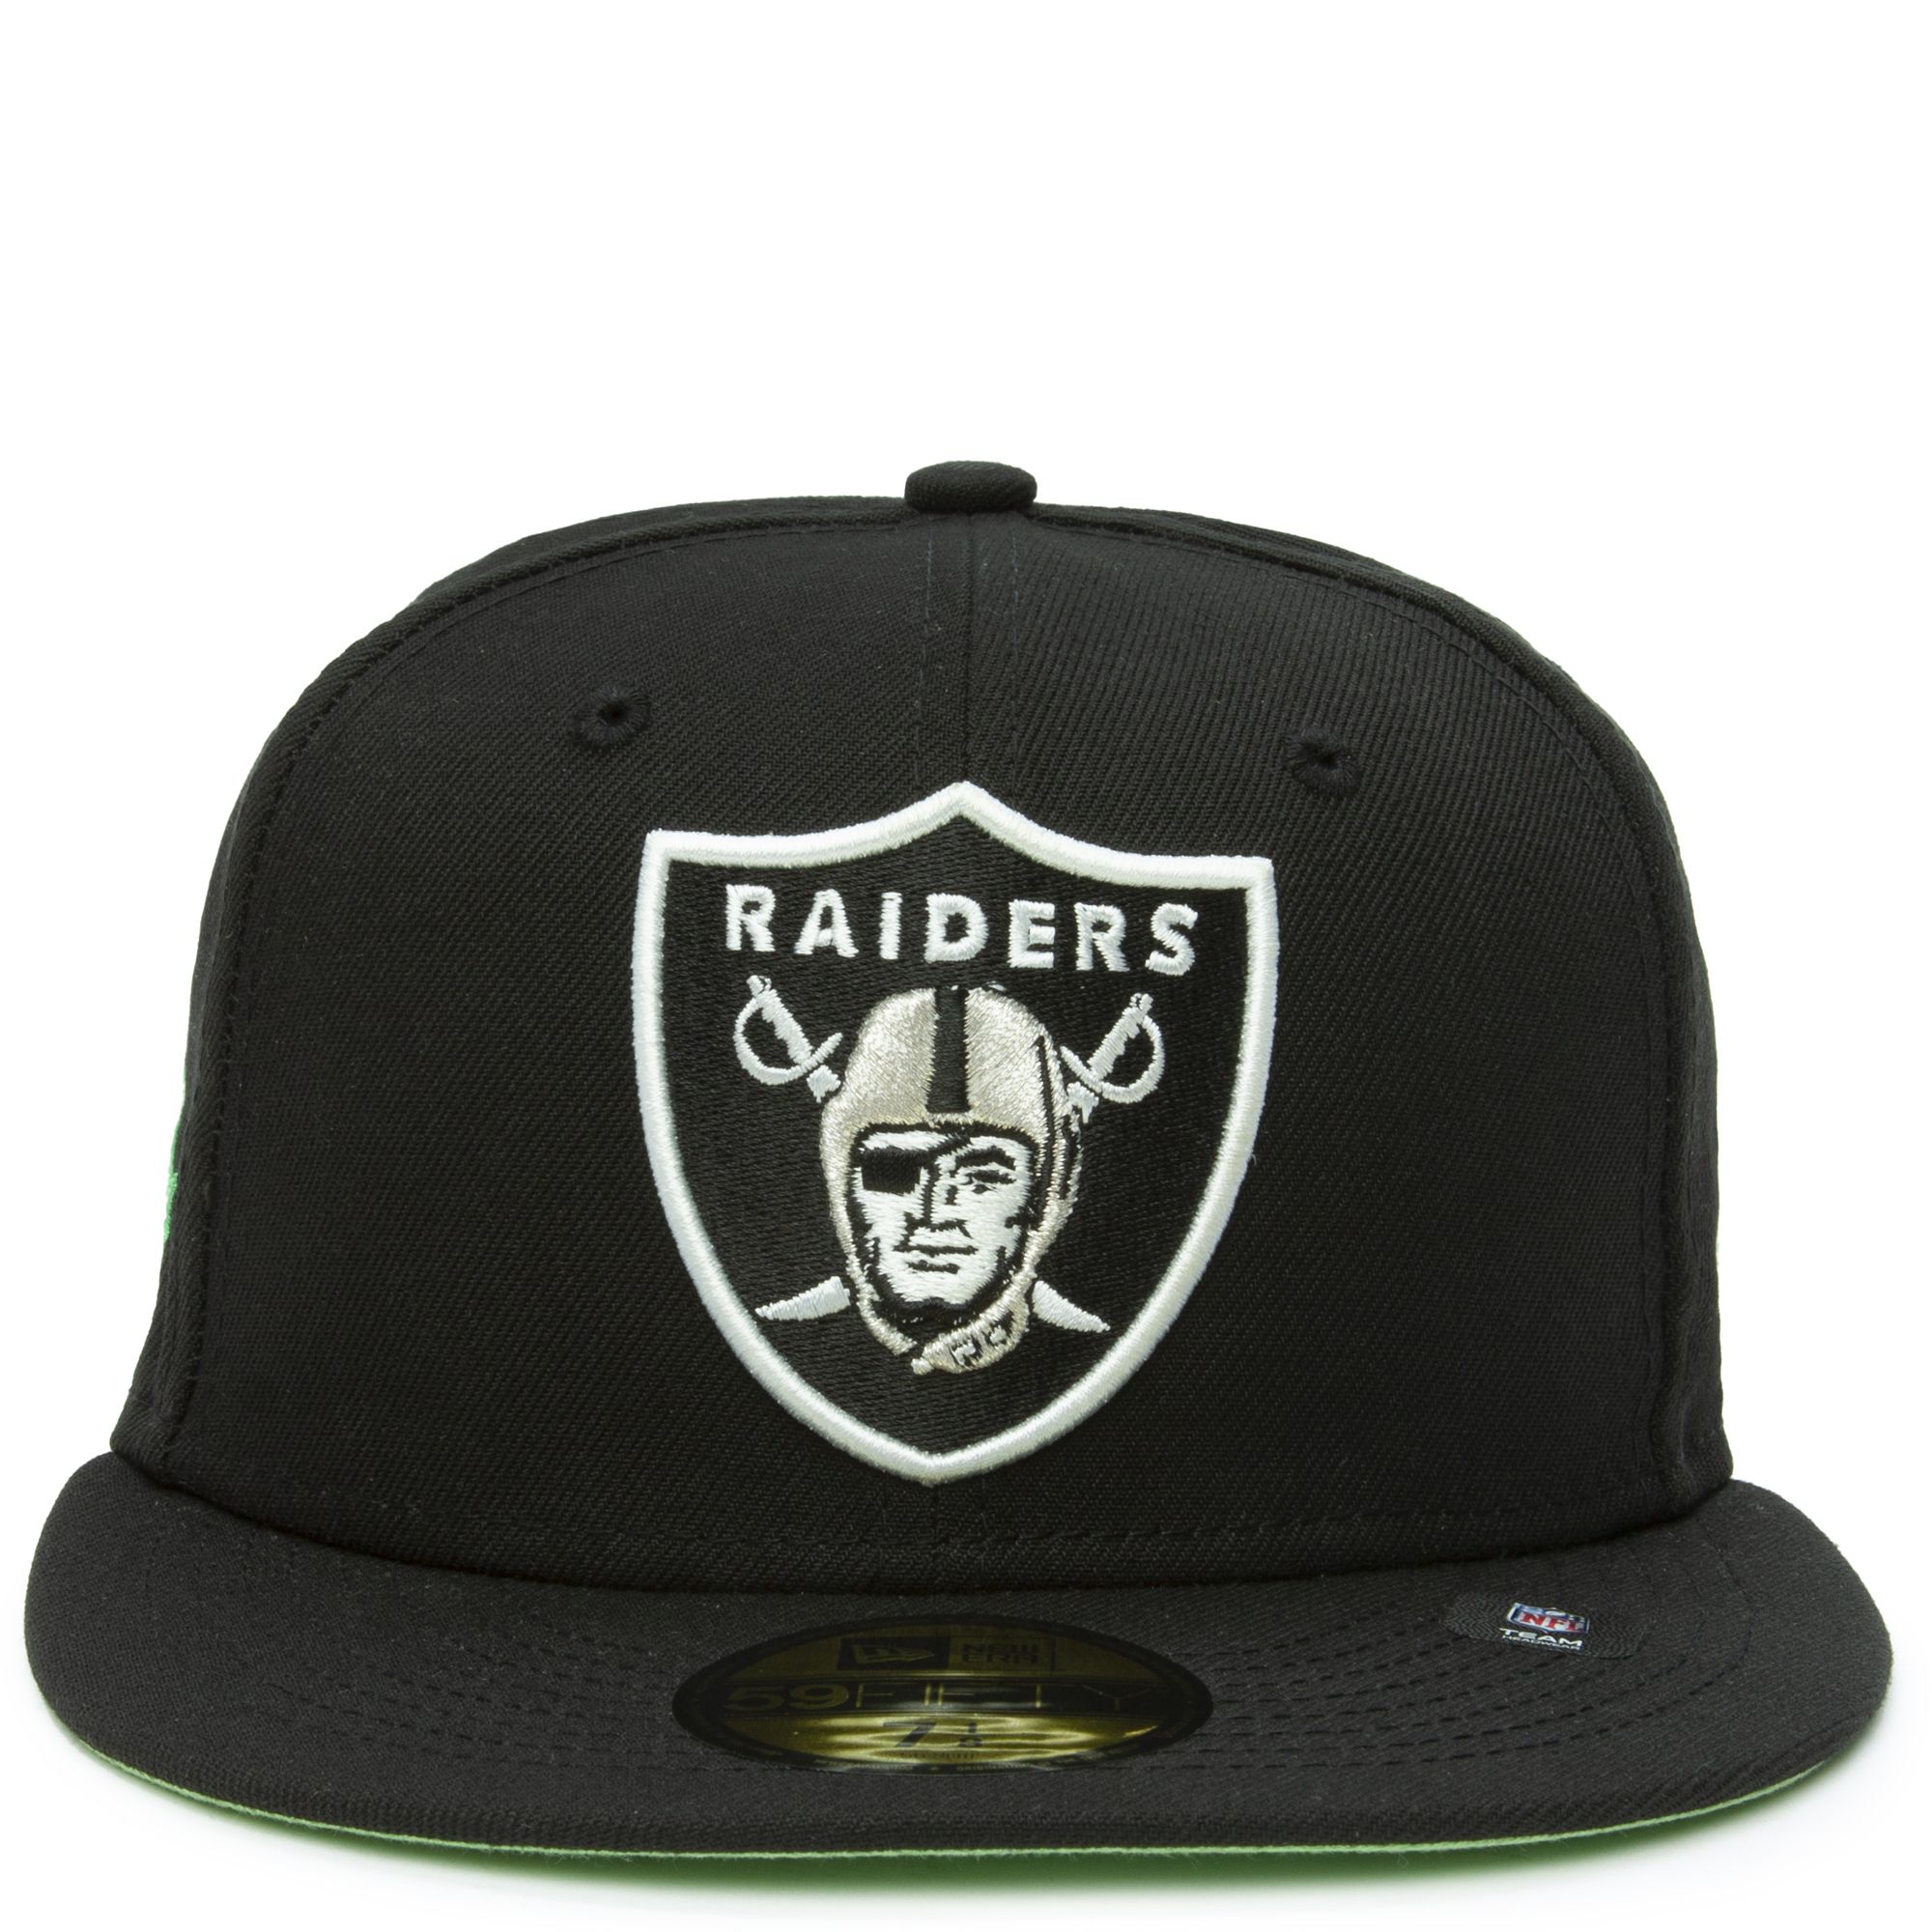 Raiders Las Vegas hat Red NFL New Era 59fifty Fitted Cap